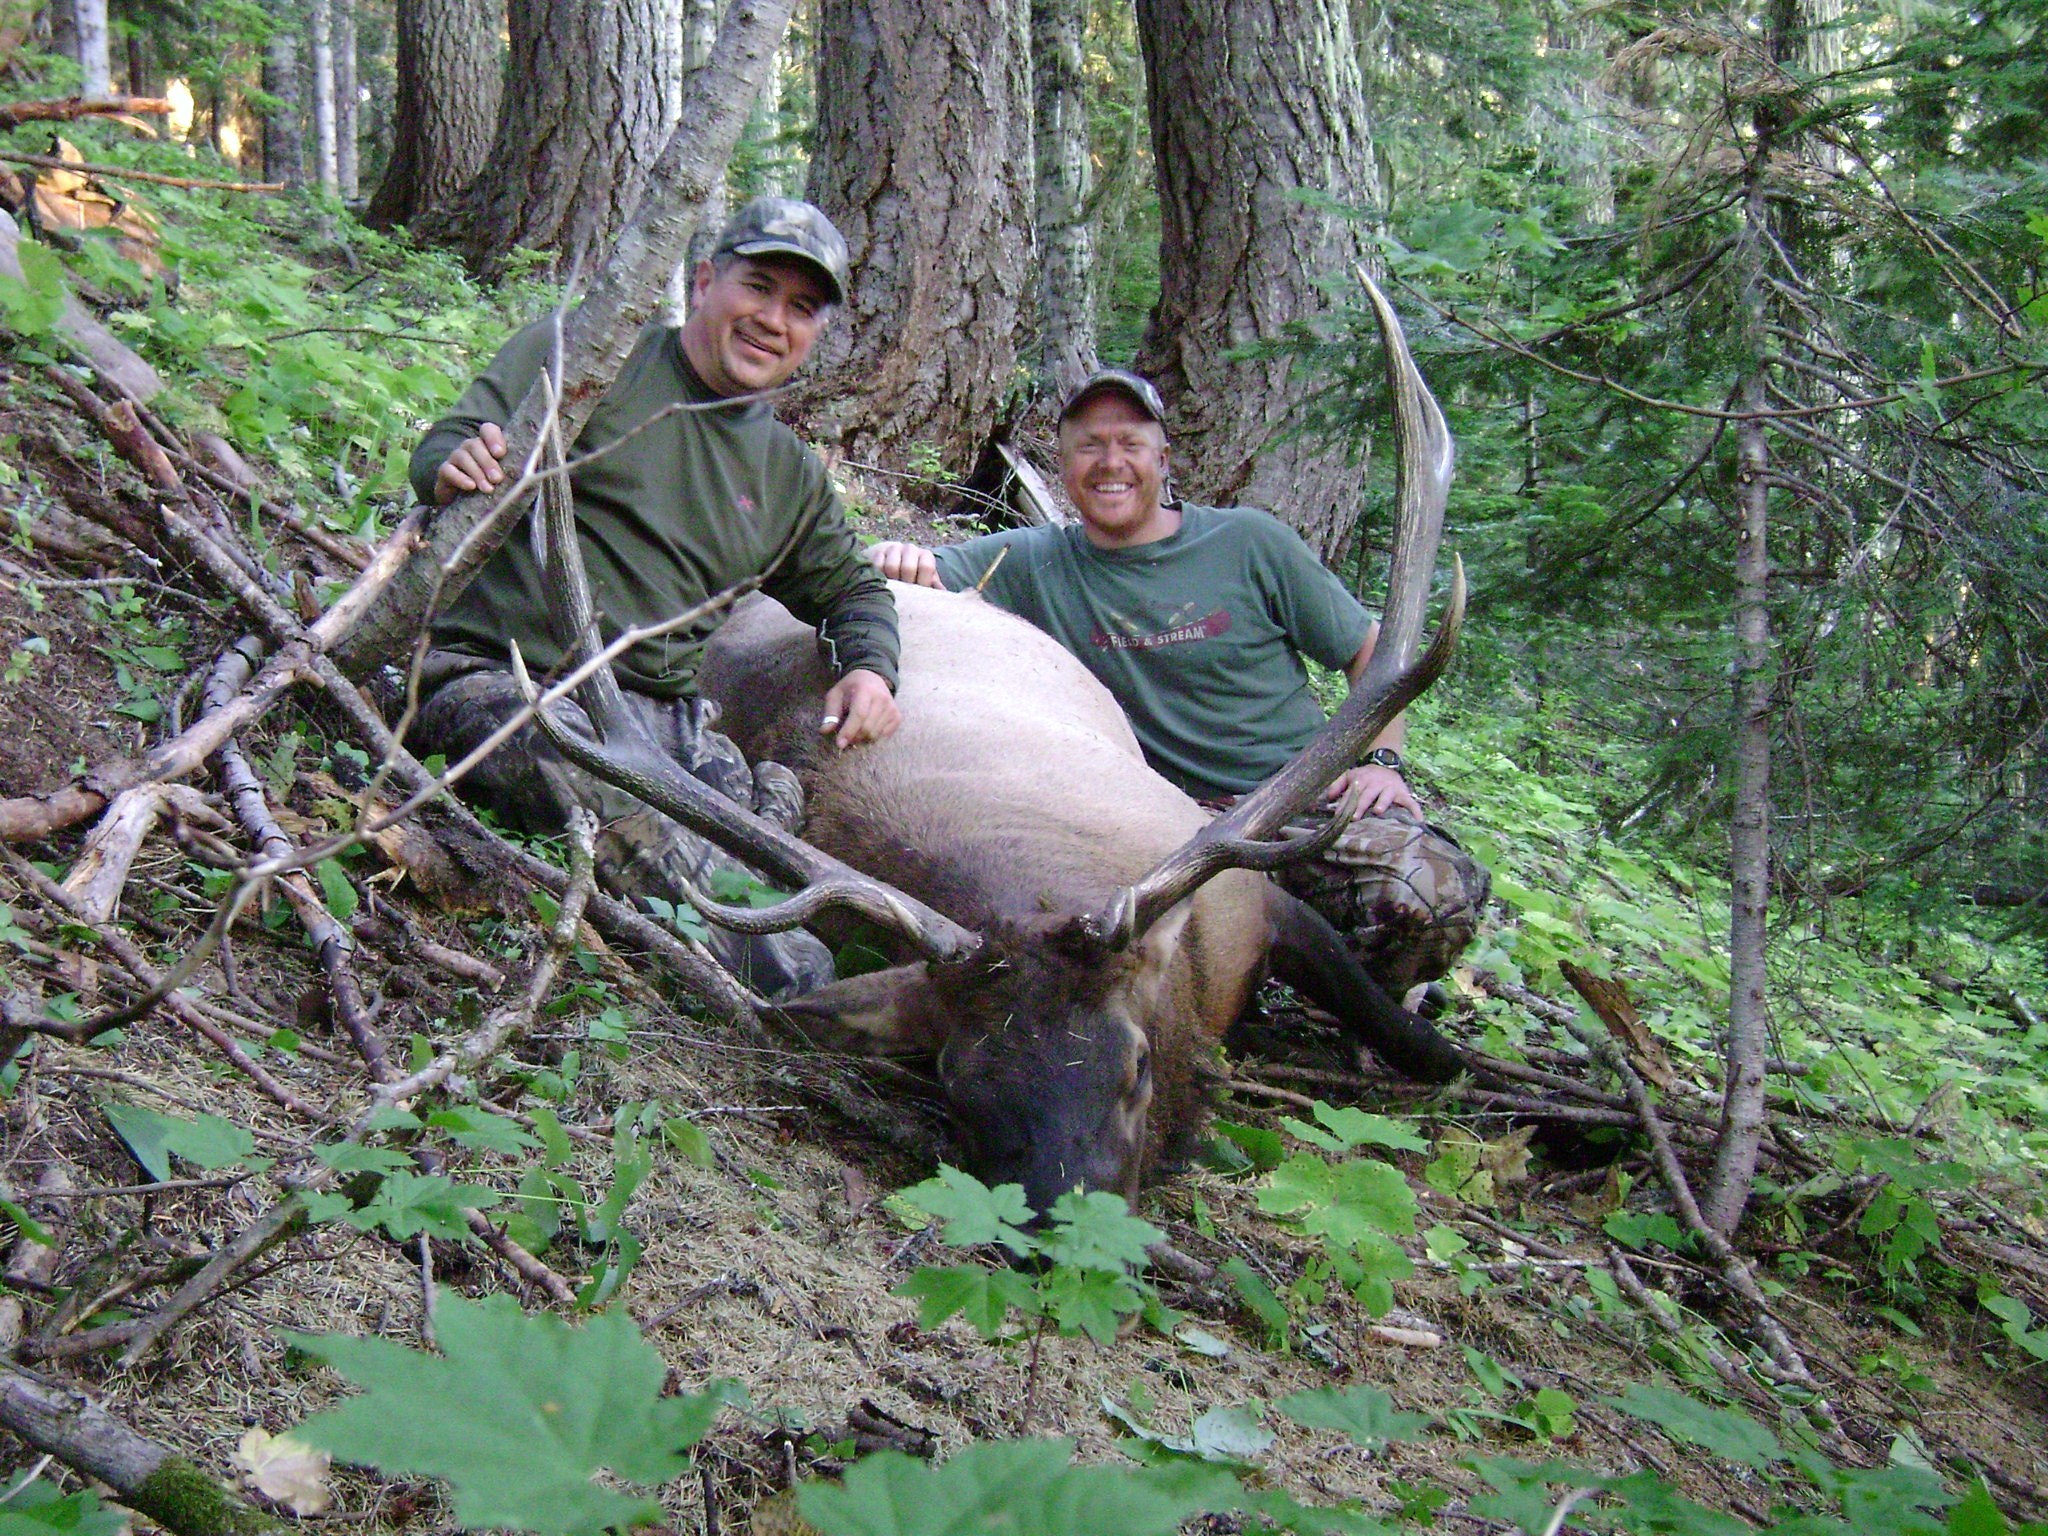 Rich Sandstrom (uphill) and me with my first elk.